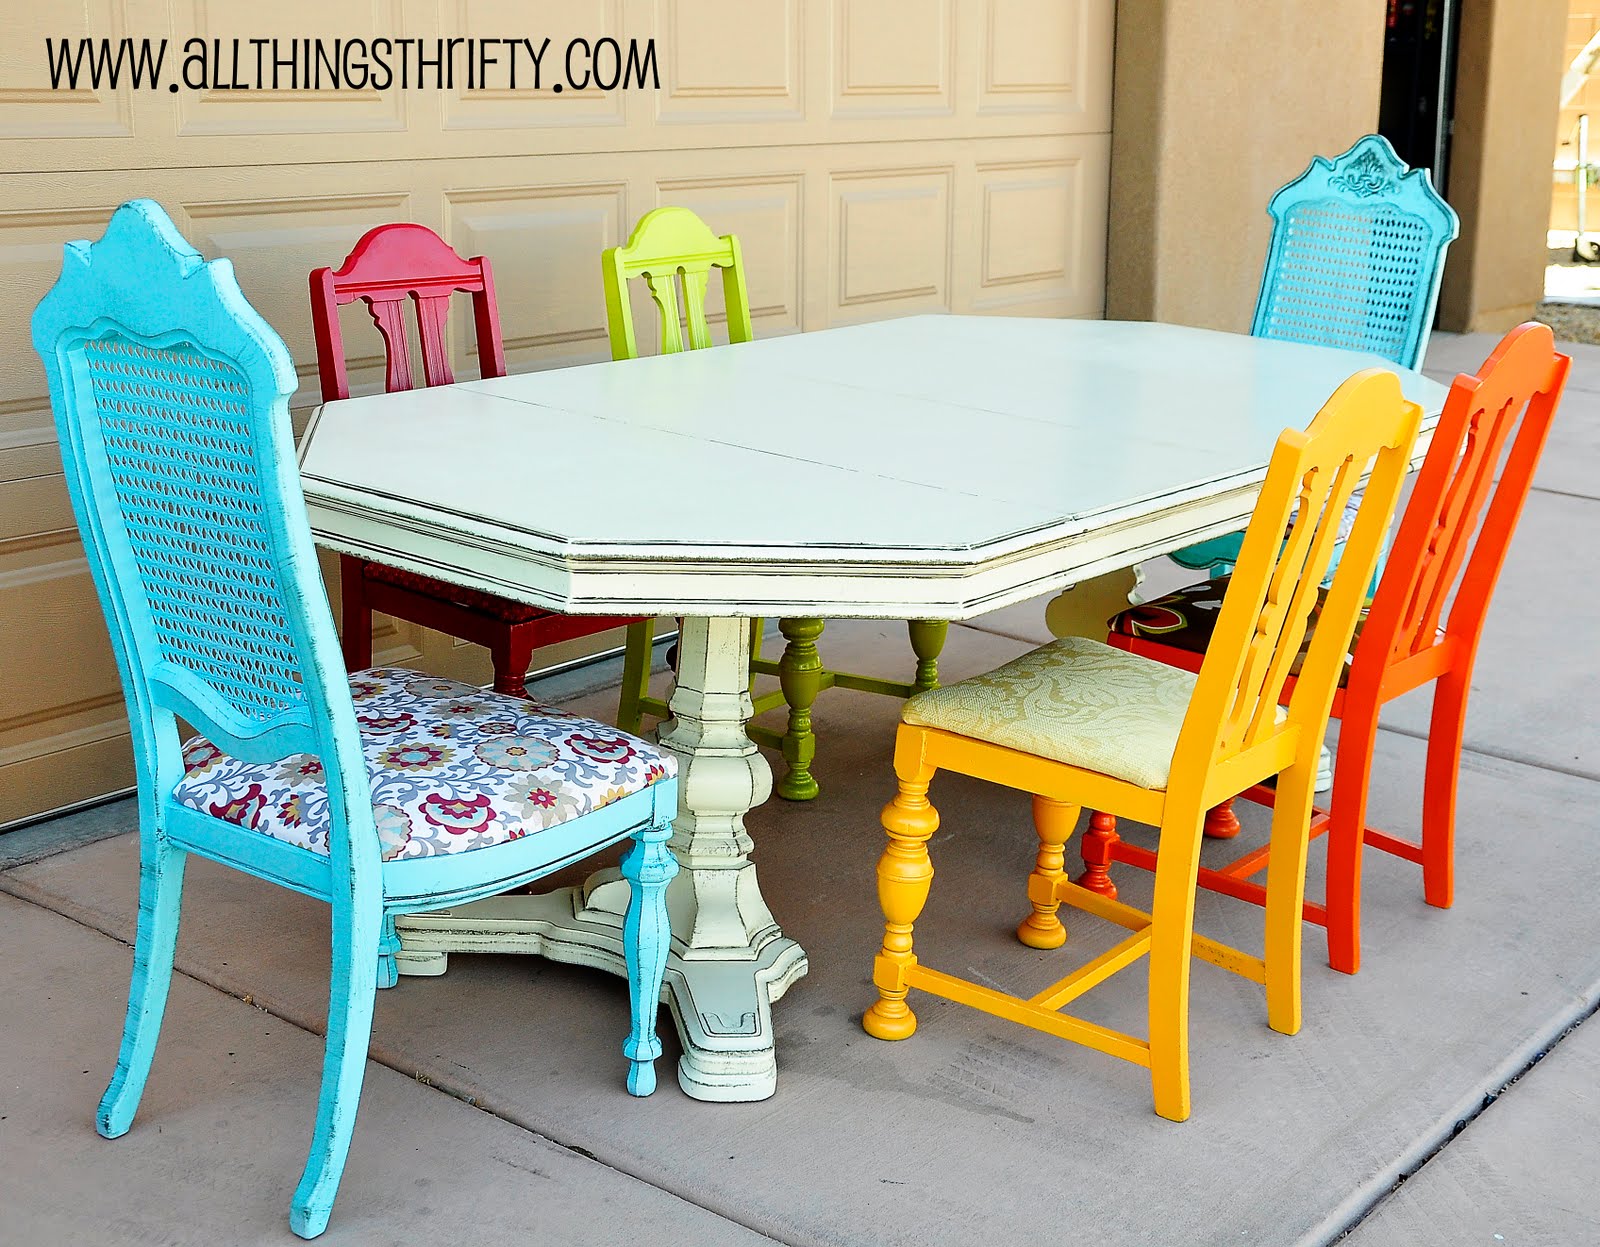 Dining Room Table Transformation All Things Thrifty